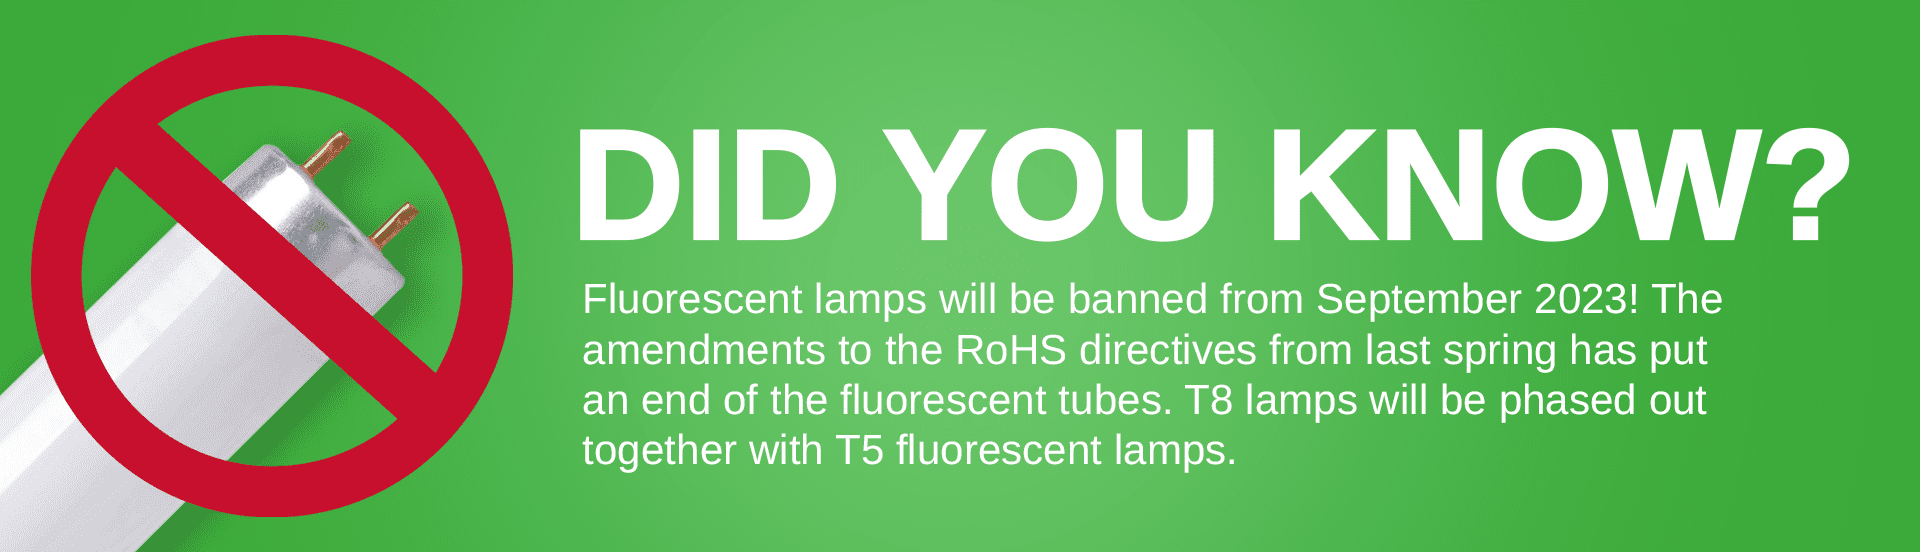 Tamlite did you know fluorescent banner